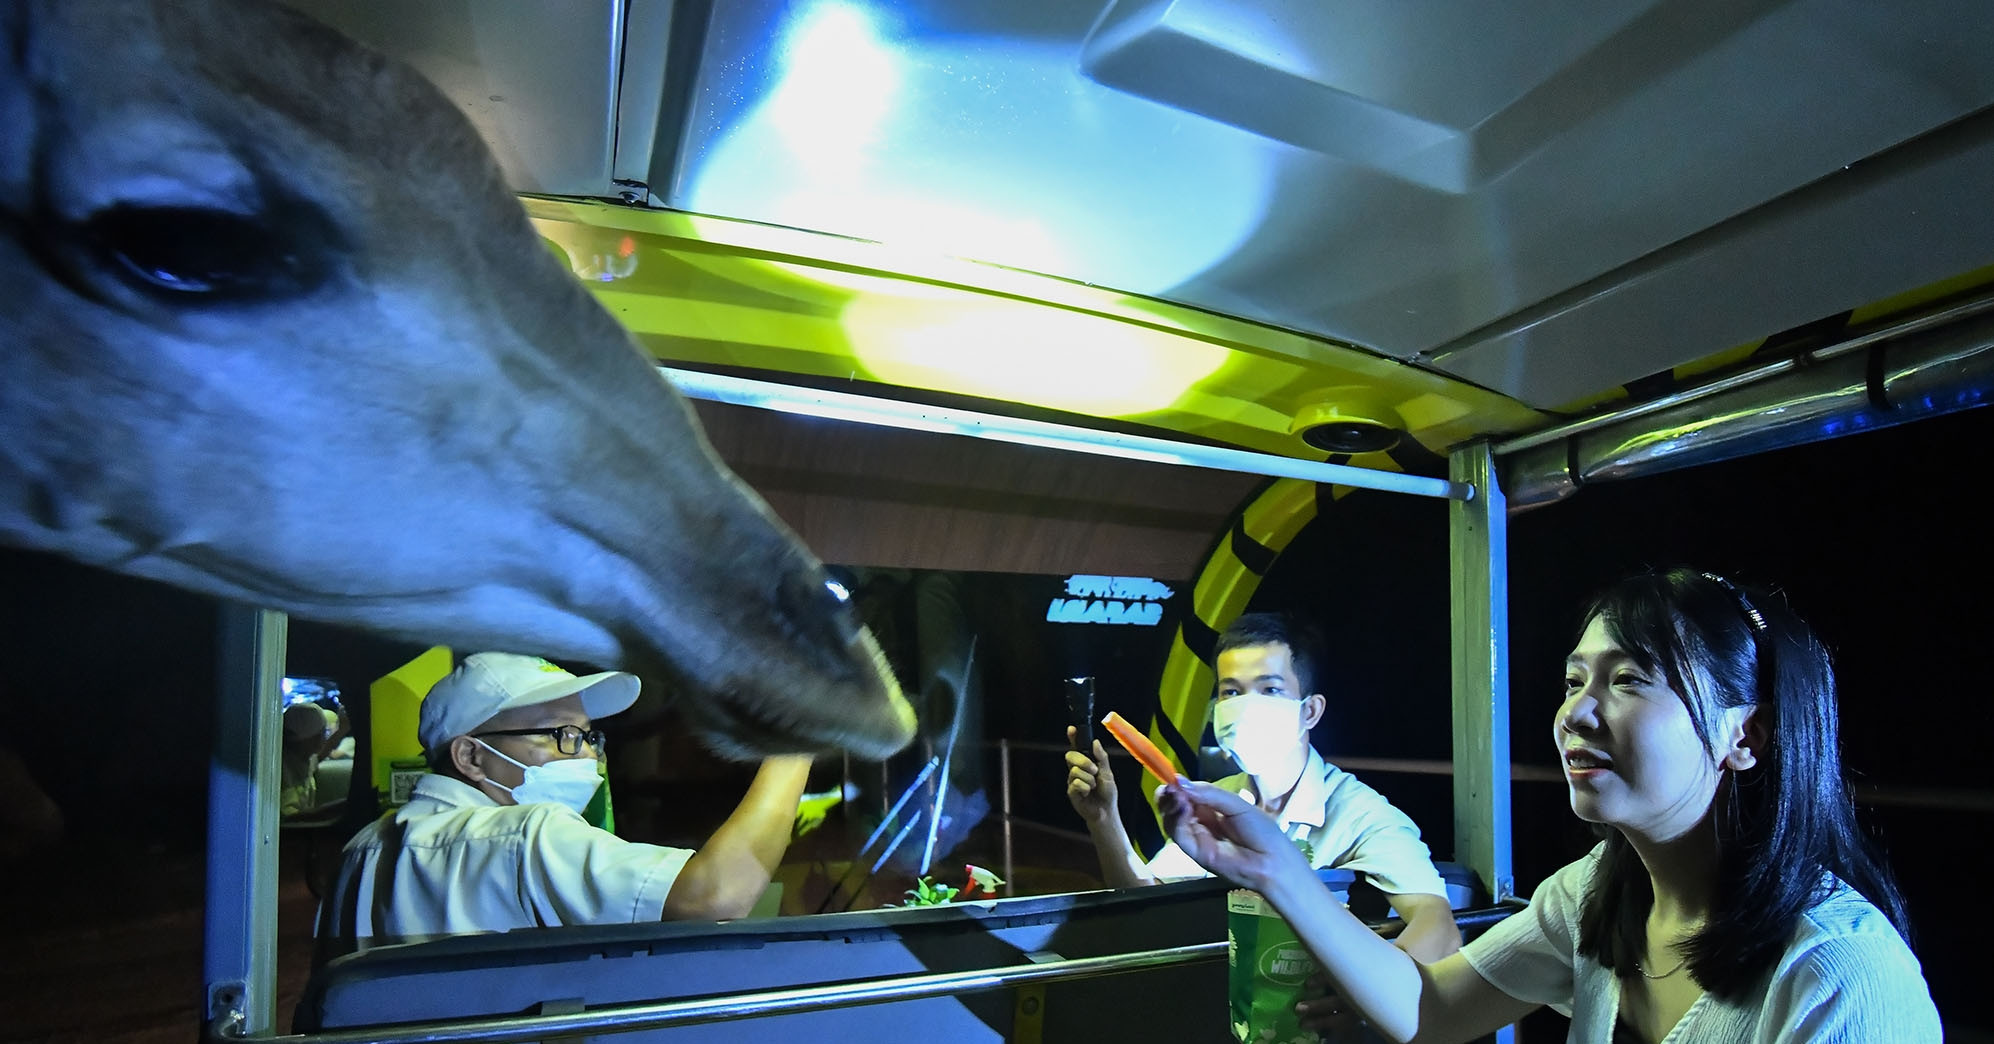 A night tour to Vietnam’s largest zoo in Phu Quoc